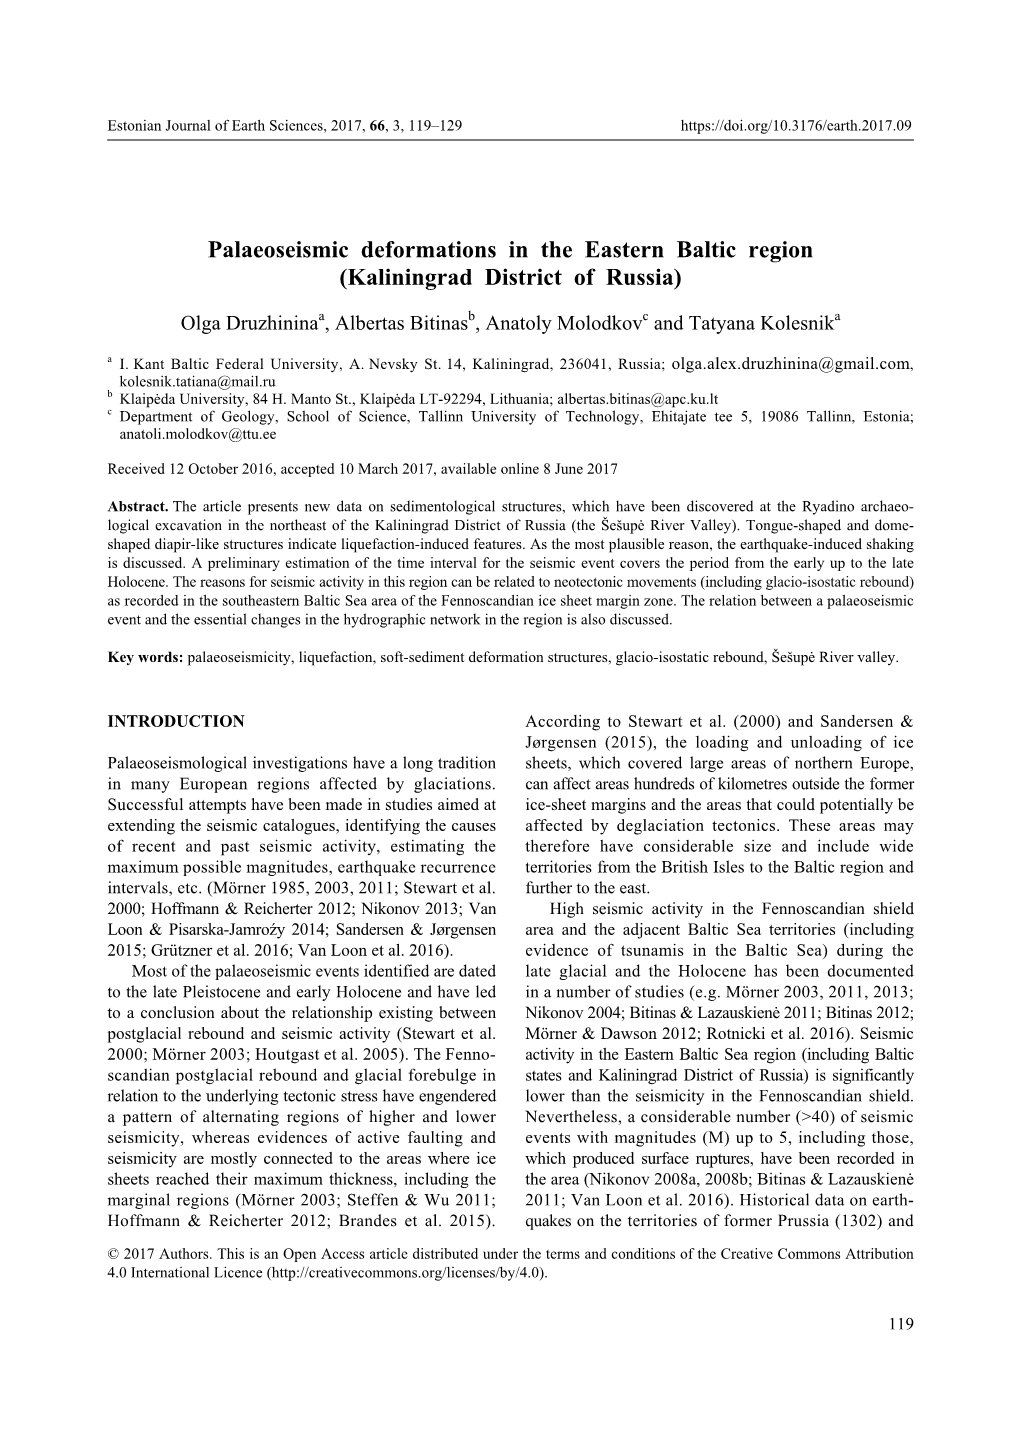 Palaeoseismic Deformations in the Eastern Baltic Region (Kaliningrad District of Russia)